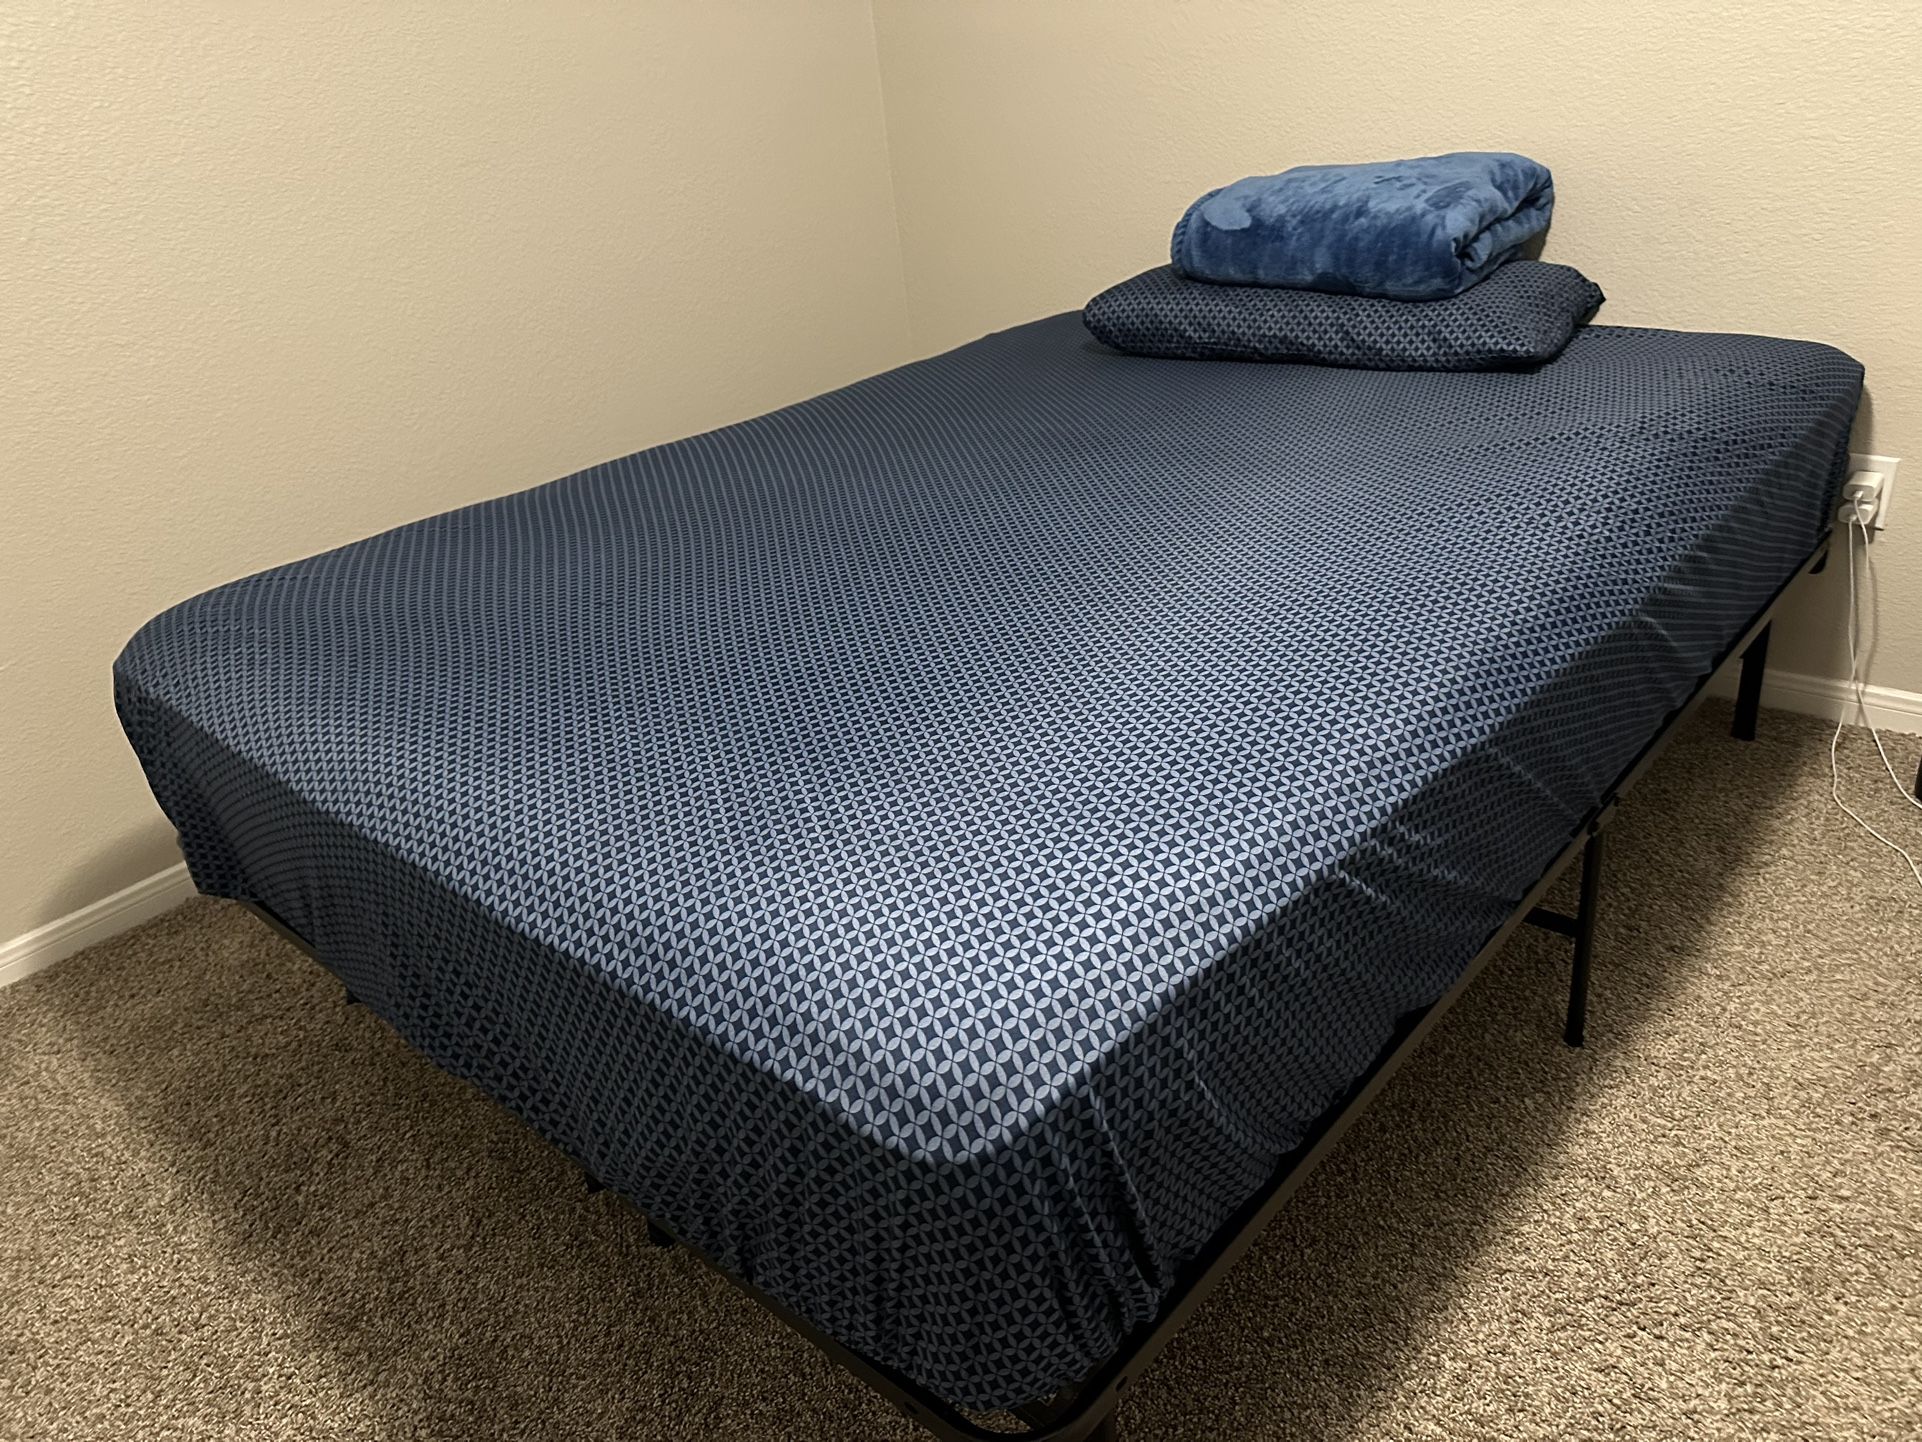 Queen Size Bed With Frame In Great Condition, 2 Storage Boxes + Table For Free